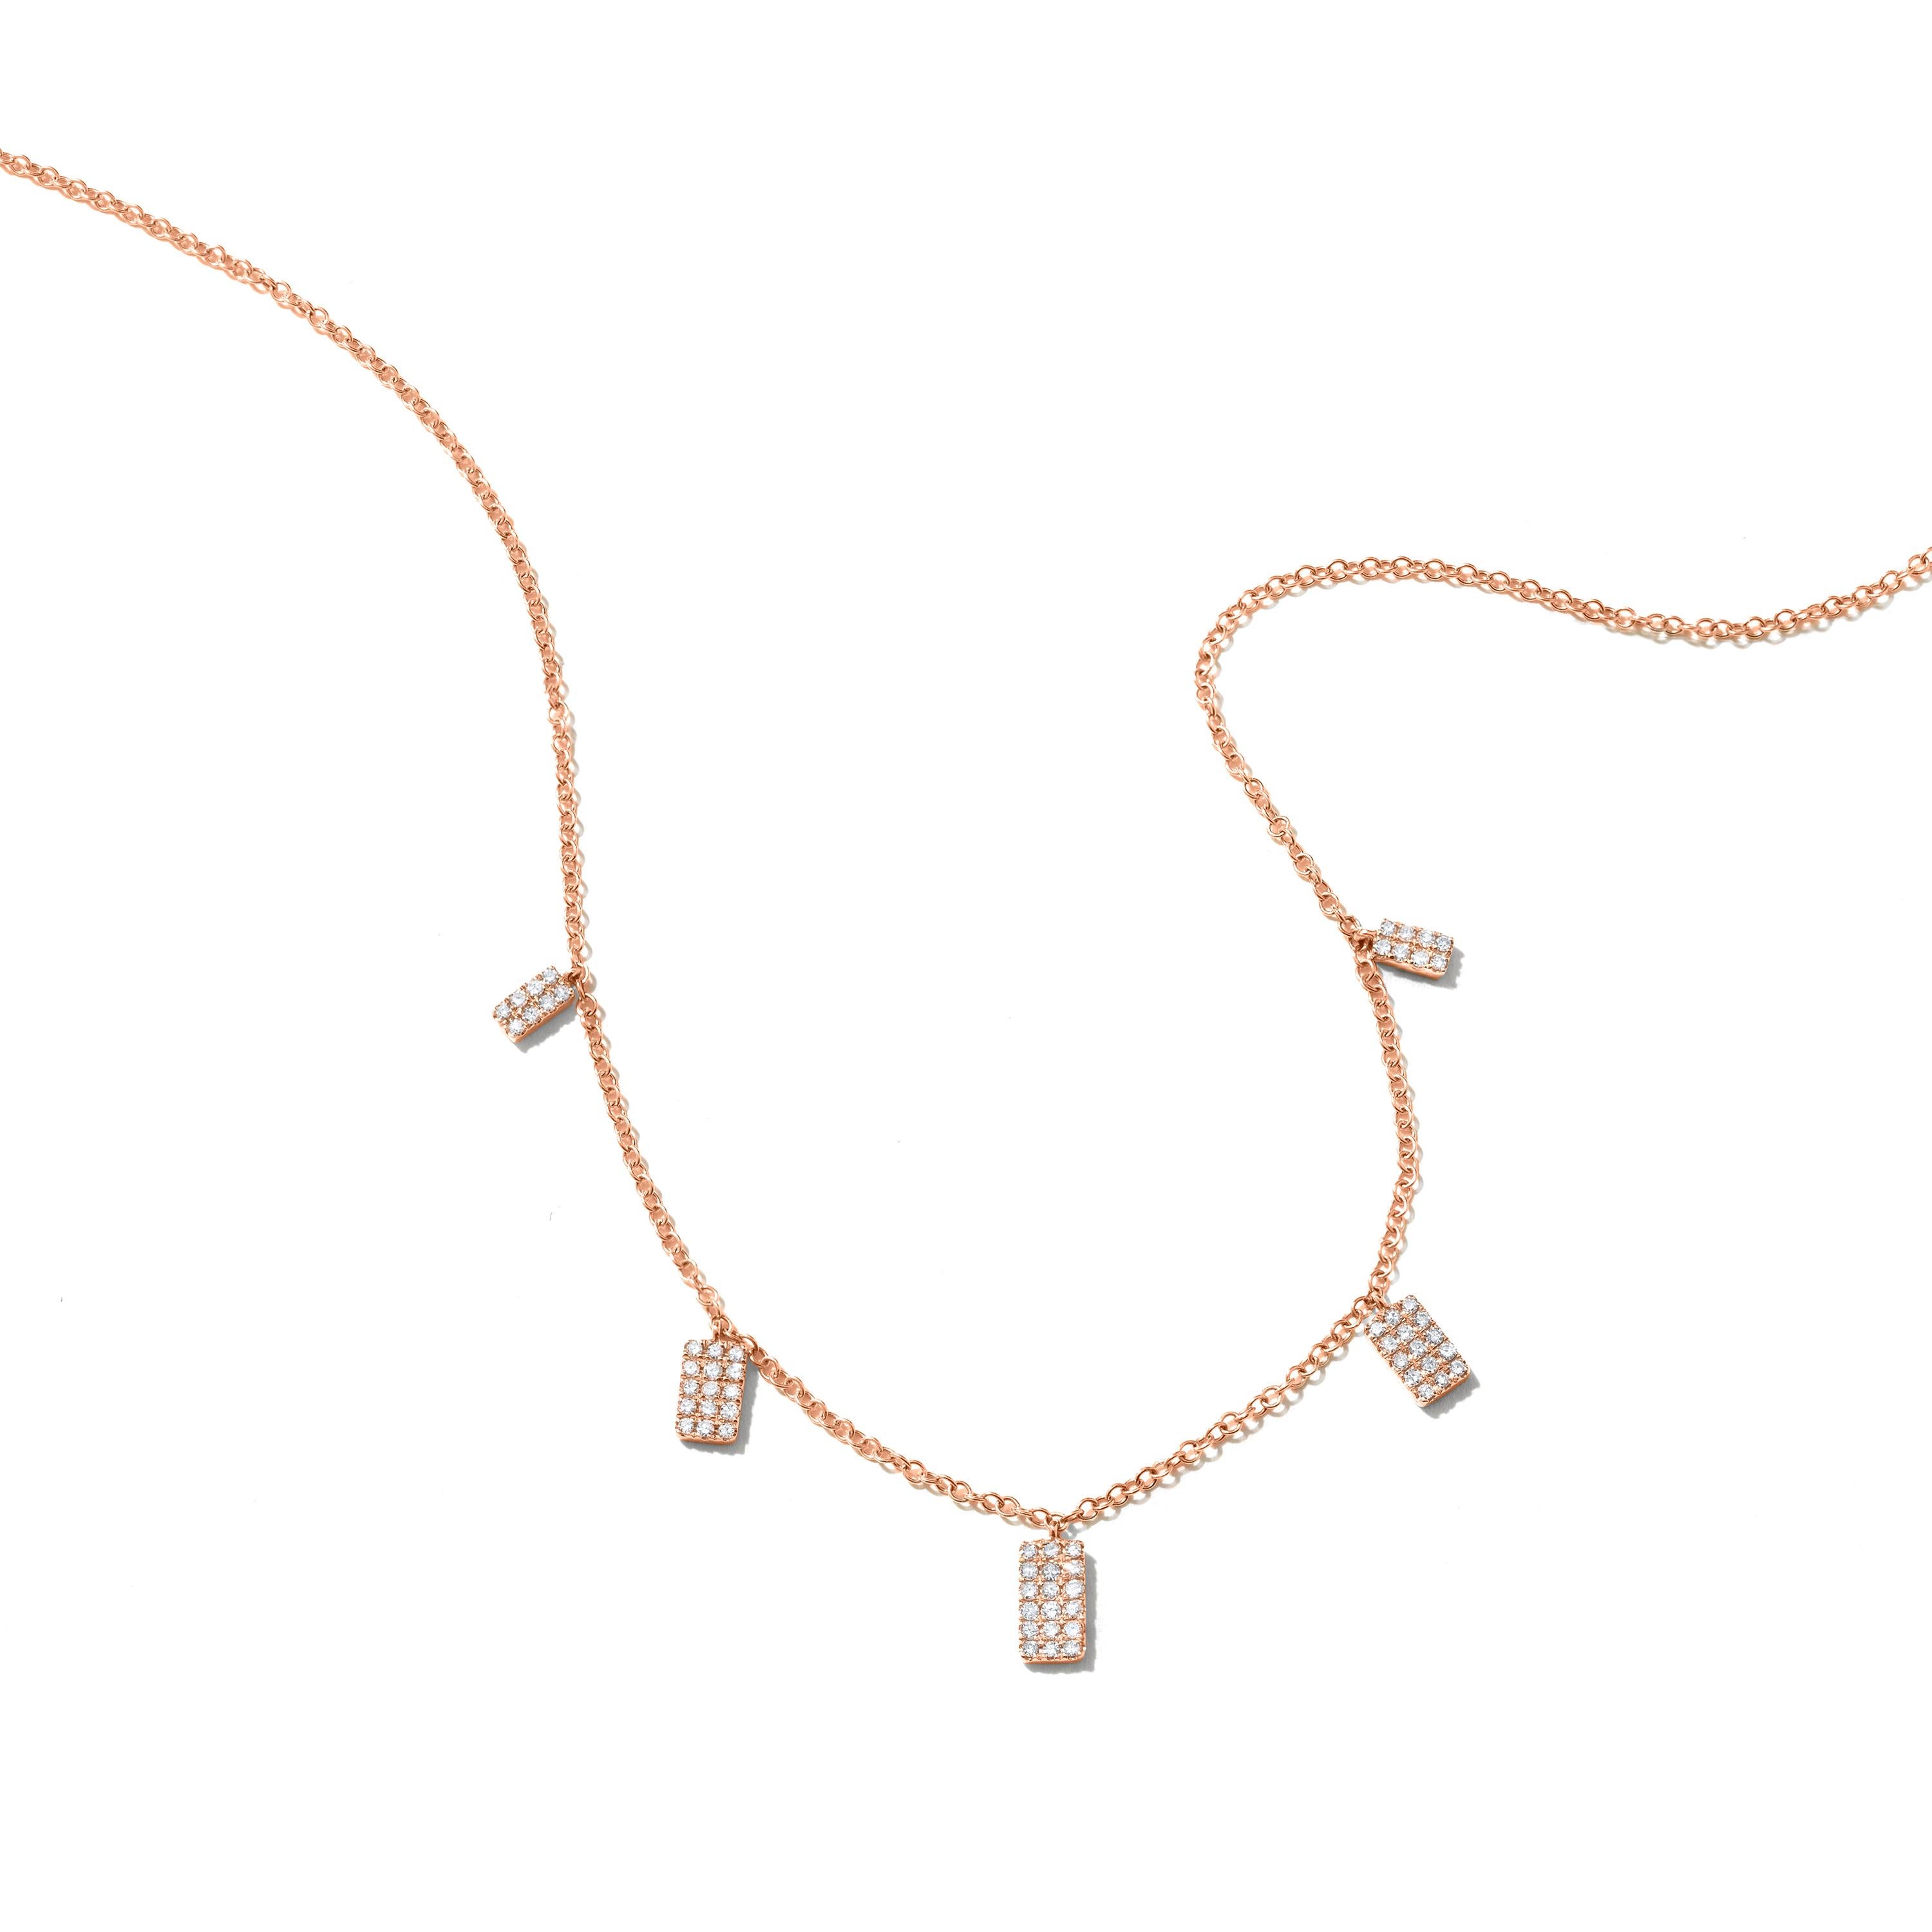 We got you the perfect accessory to go with every outfit! Presenting a necklace with glittering charms of round diamonds draping an elegant cable chain of 14K rose gold.

Please follow the Luxury Jewels storefront to view the latest collections &